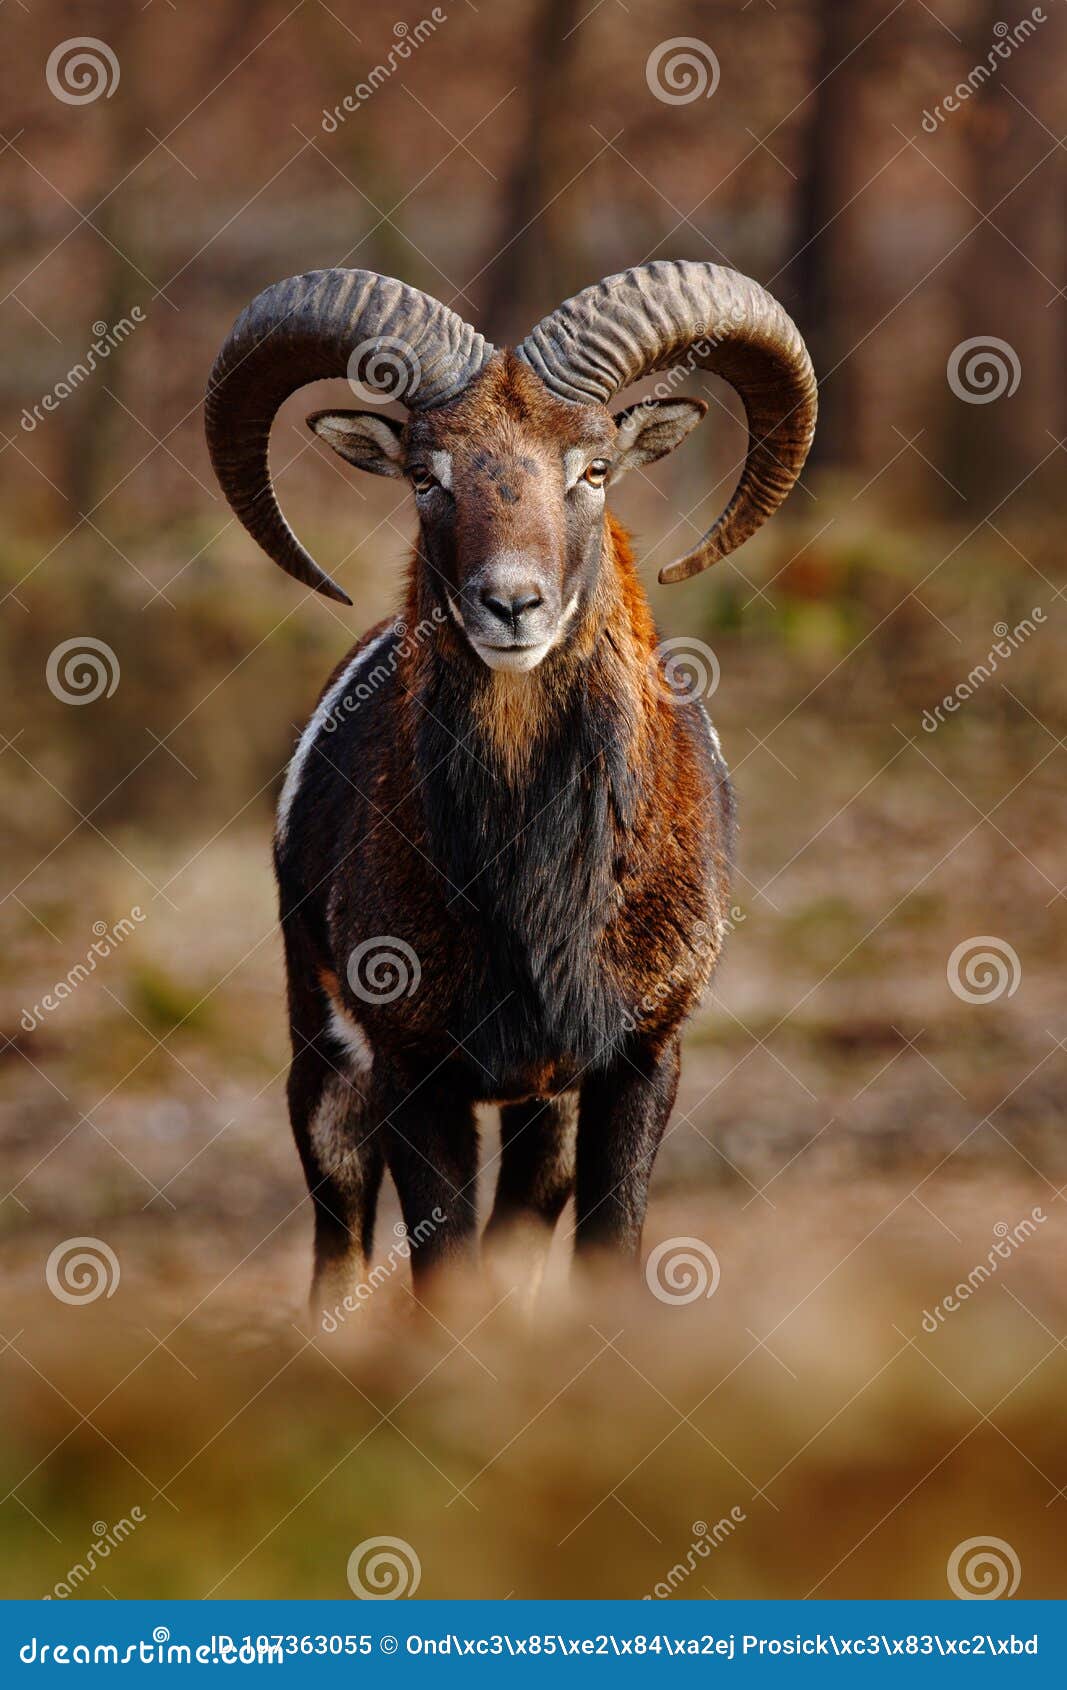 mouflon, ovis orientalis, forest horned animal in the nature habitat, portrait of mammal with big horn, face to face view, praha,